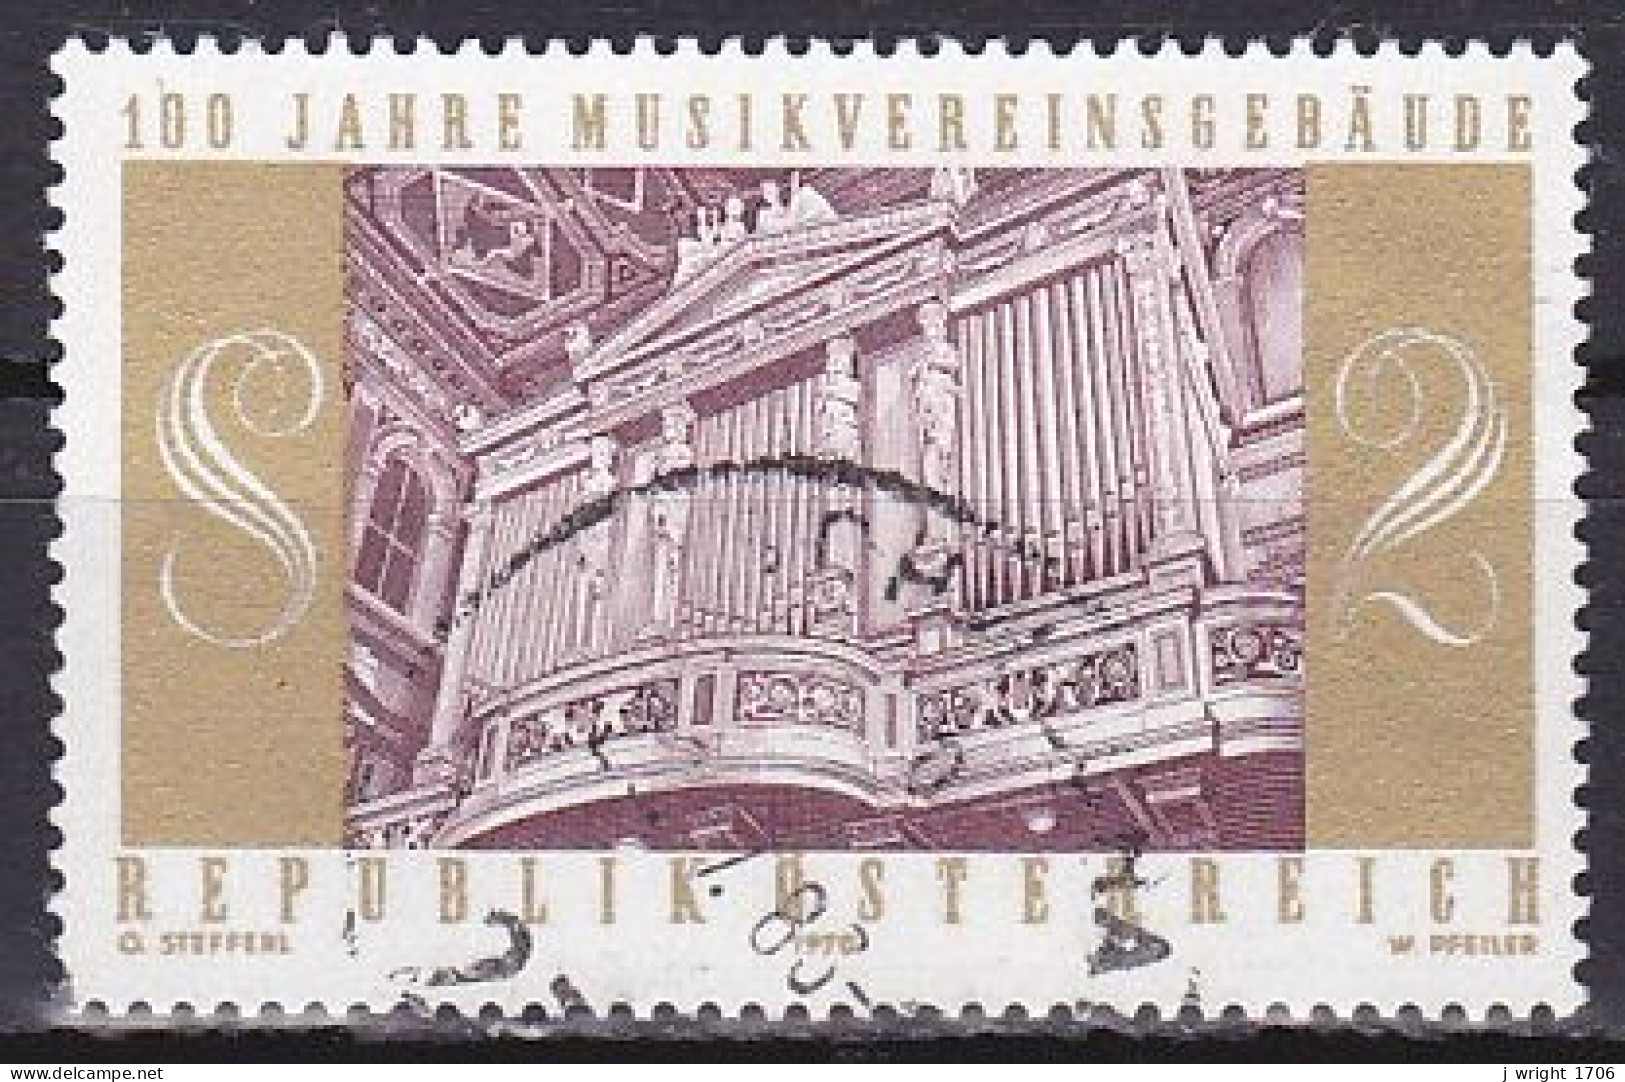 Austria, 1970, Vienna Music Academy Centenary, 2s, USED - Used Stamps